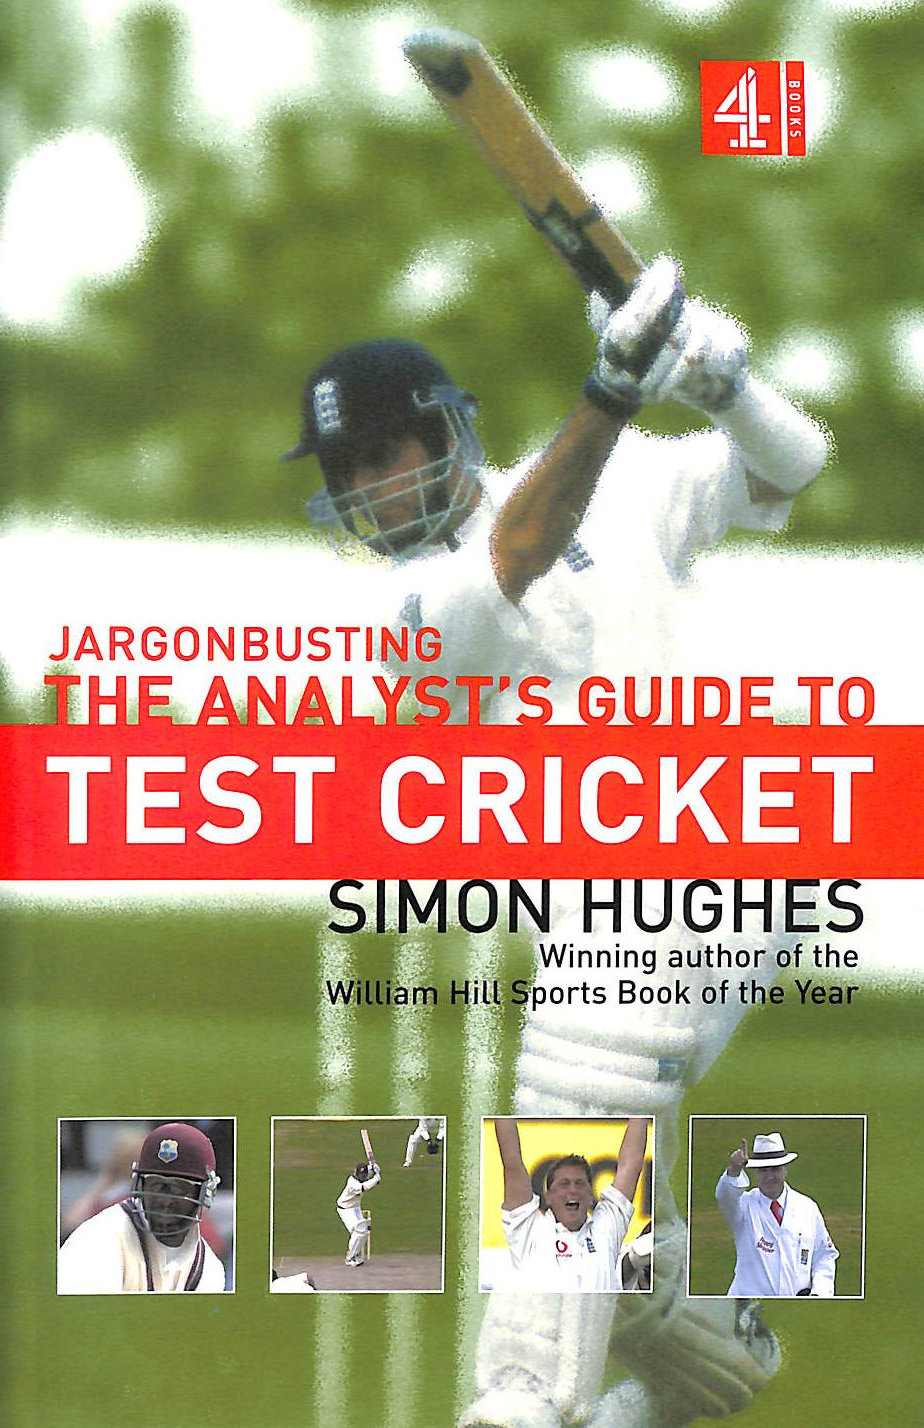 HUGHES, SIMON - Jargonbusting: An Analyst's Guide To Test Cricket: The Analyst's Guide To Test Cricket